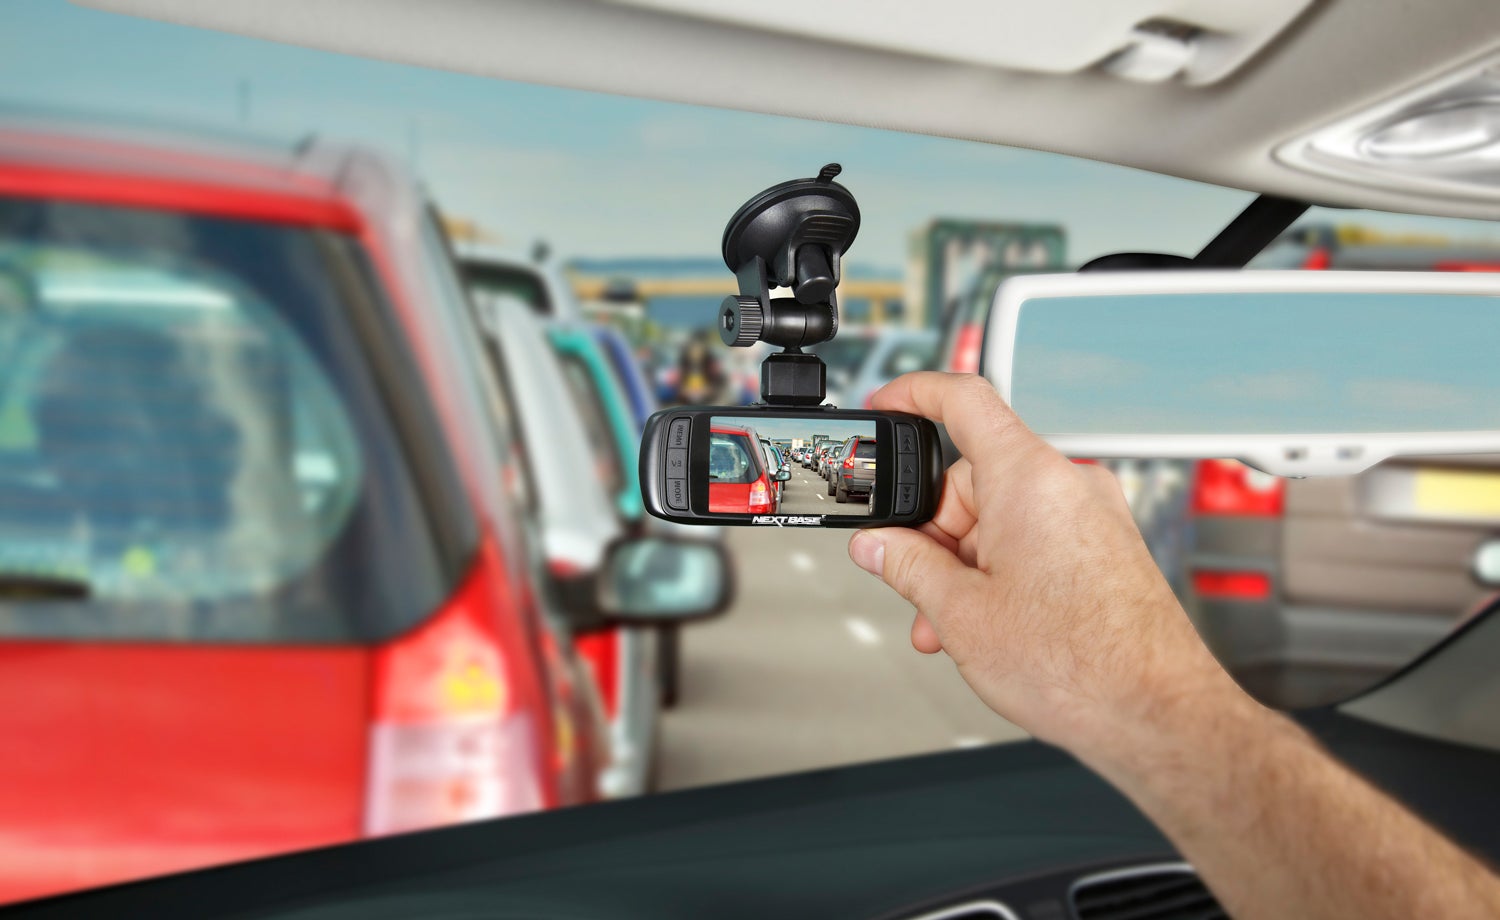 Dashcams are proving more and more popular, with drivers keen to save money on insurance and perhaps make a video go viral.